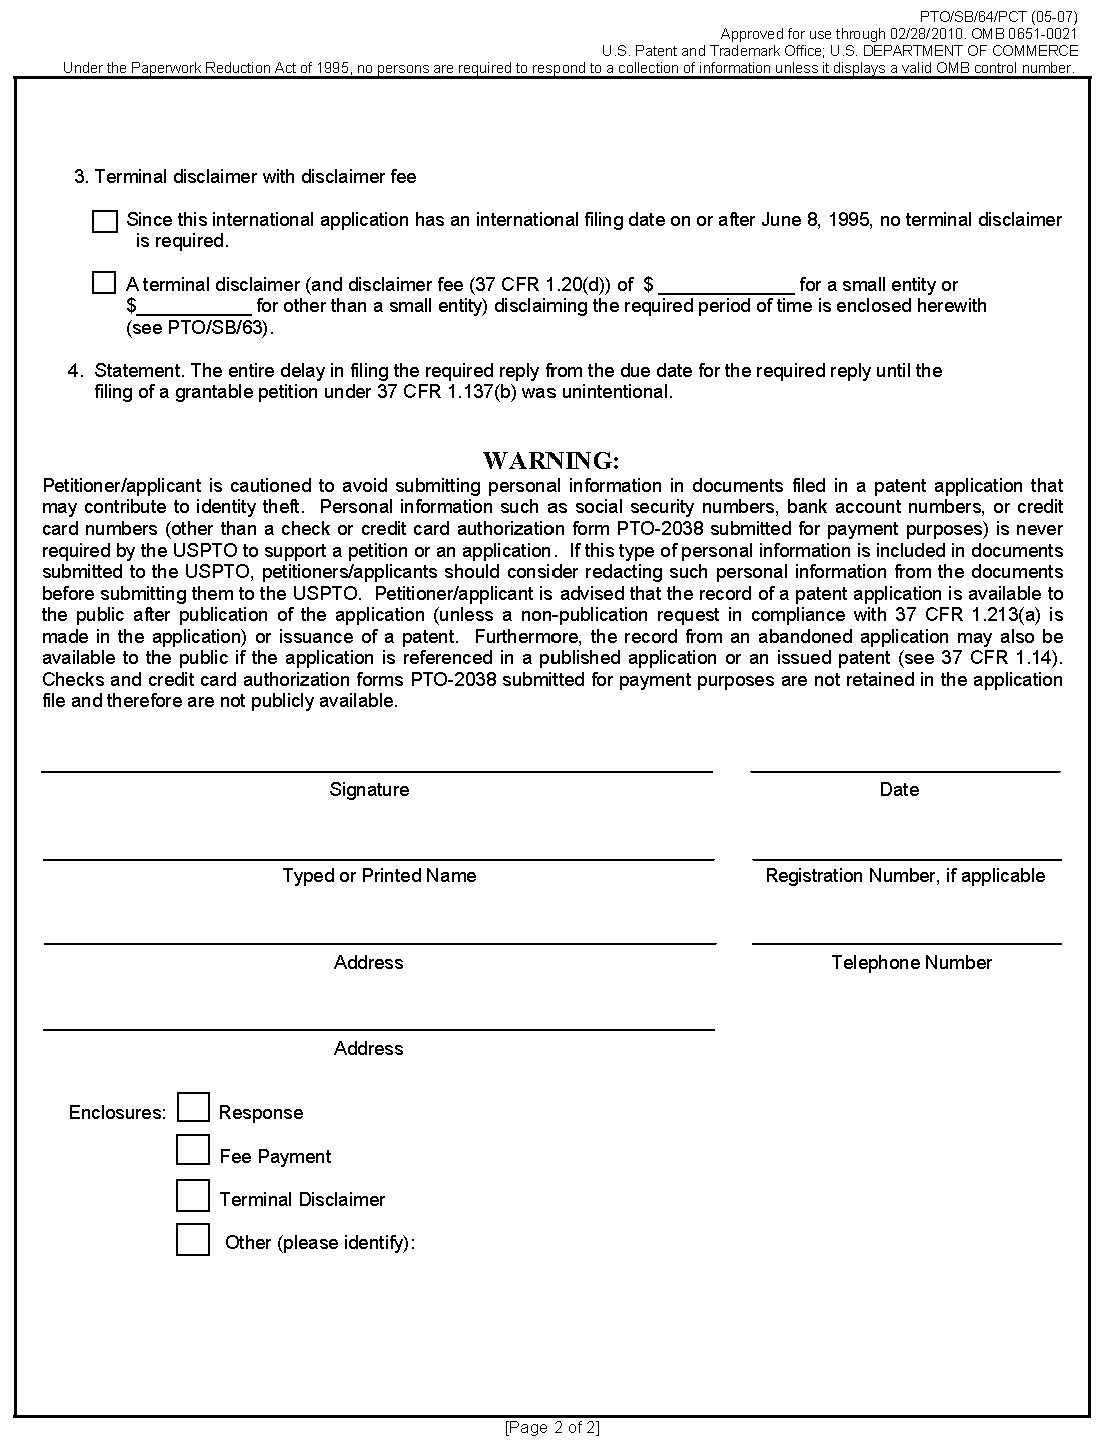 page 2 form pto/sb/64/pct petition for revival of an international application for patent designating the u.s. abandoned intentionally under 37 cfr 1.137(b).